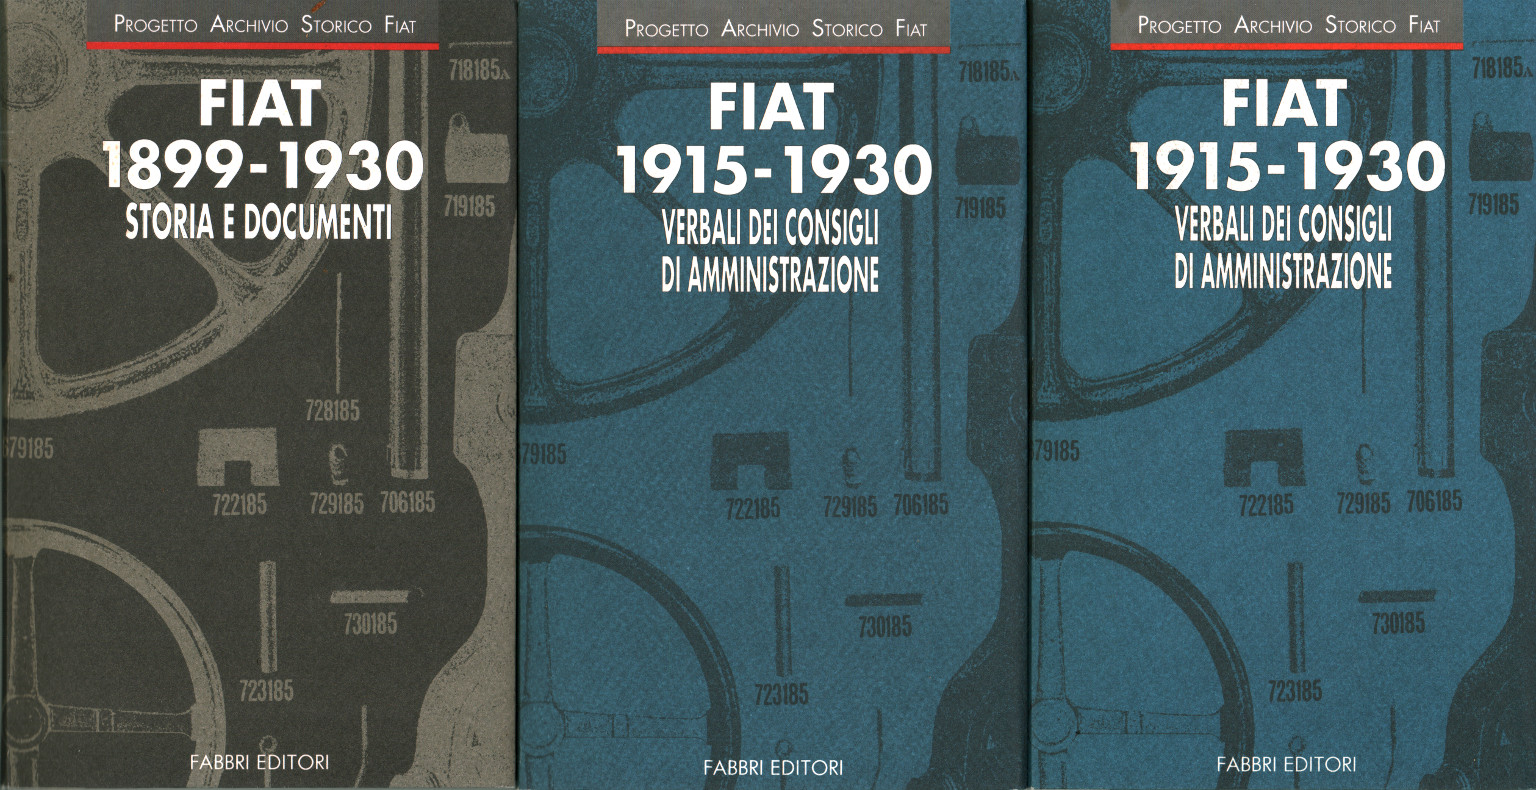 FIAT 1915-1930 Minutes of the board of%,FIAT 1915-1930 Minutes of the board of%,FIAT 1915-1930 Minutes of the board of%